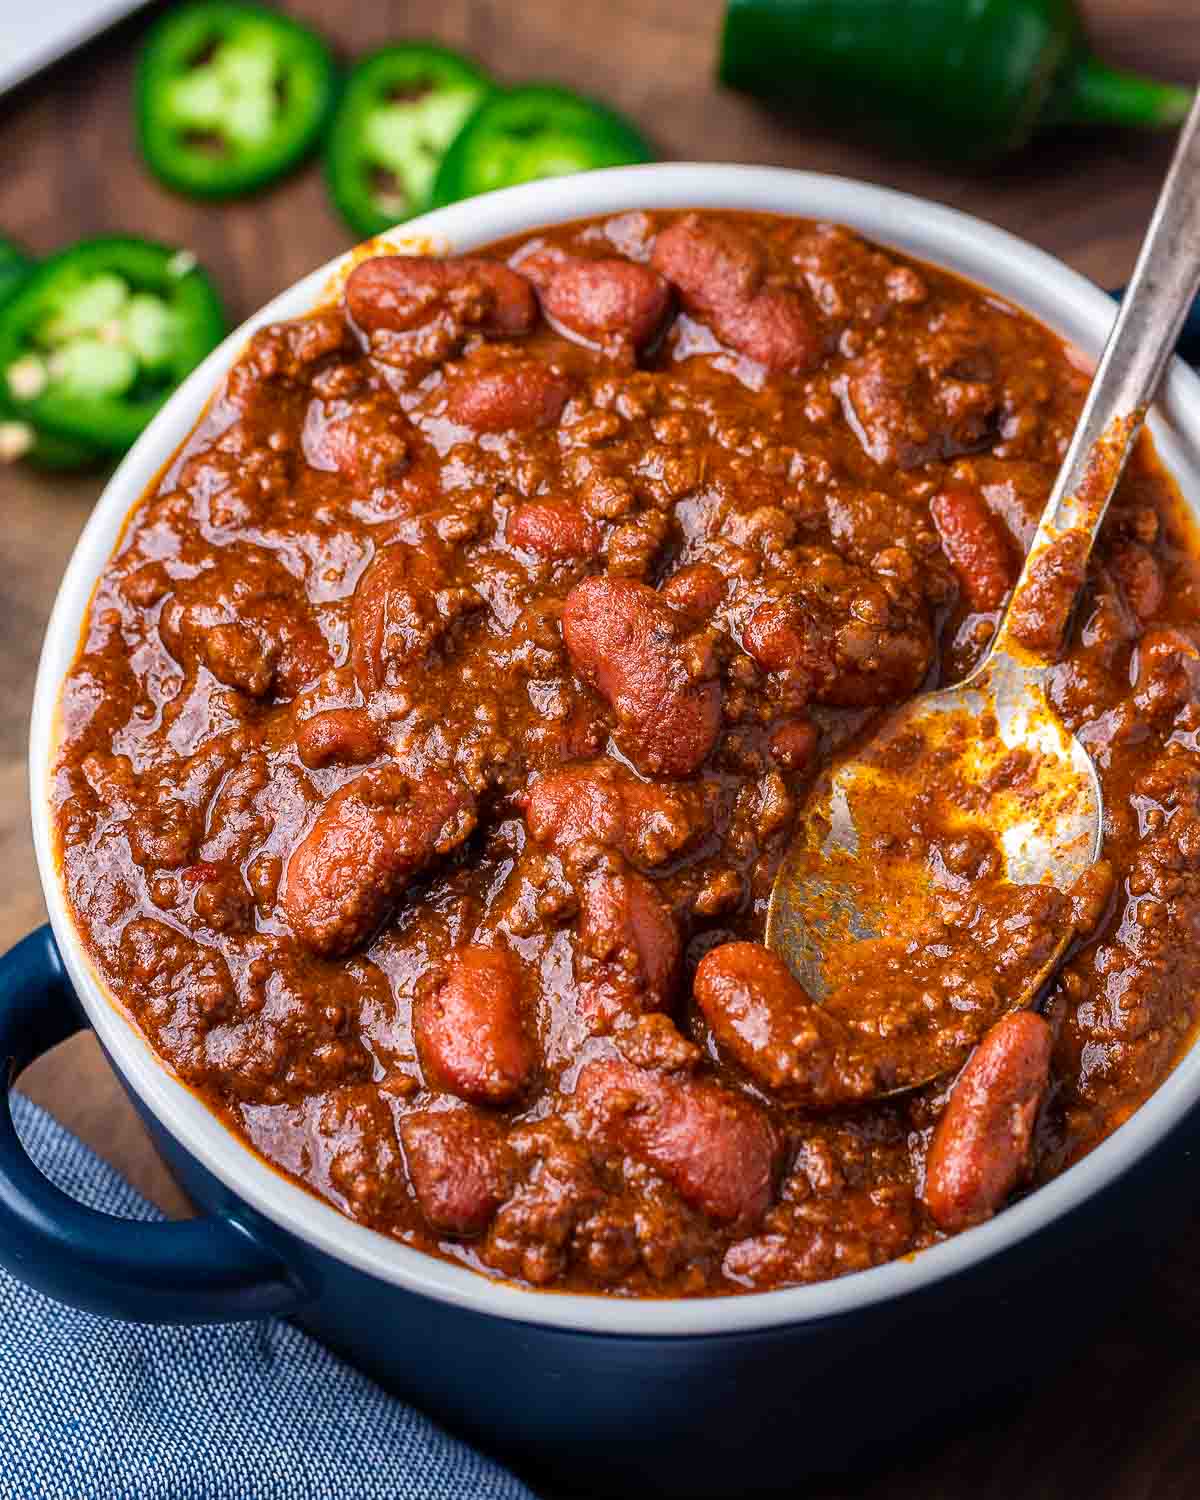 Large bowl of chili with jalapenos in the background.